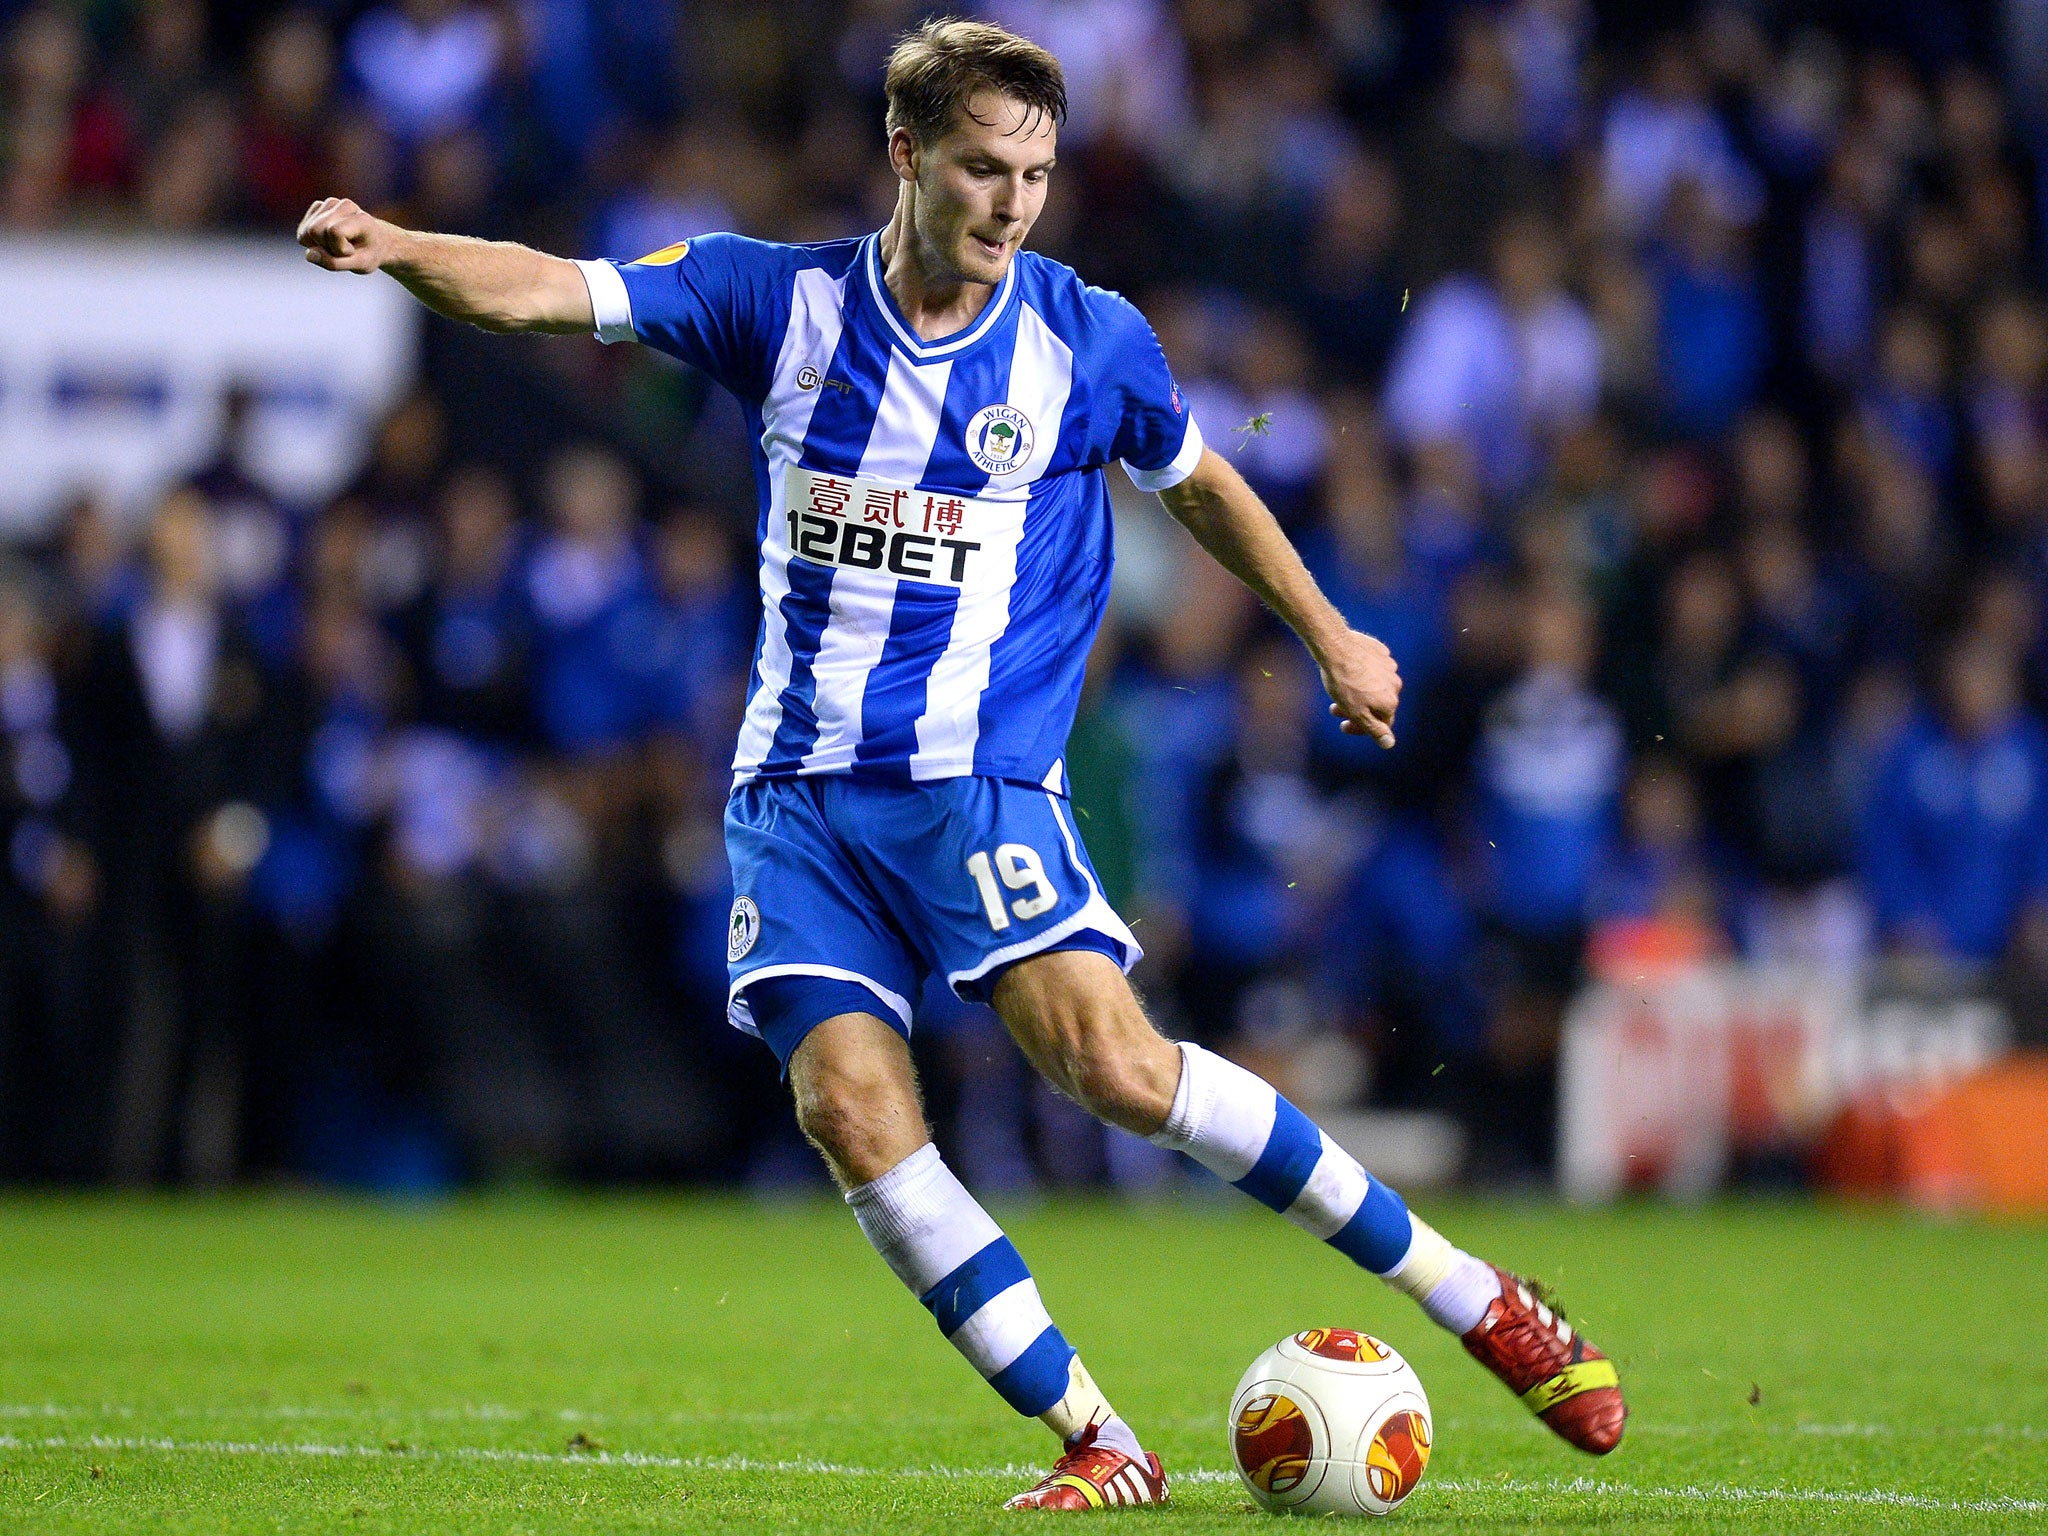 Nick Powell, on-loan from Manchester United, scored twice for Wigan in their 3-1 victory over NK Maribor